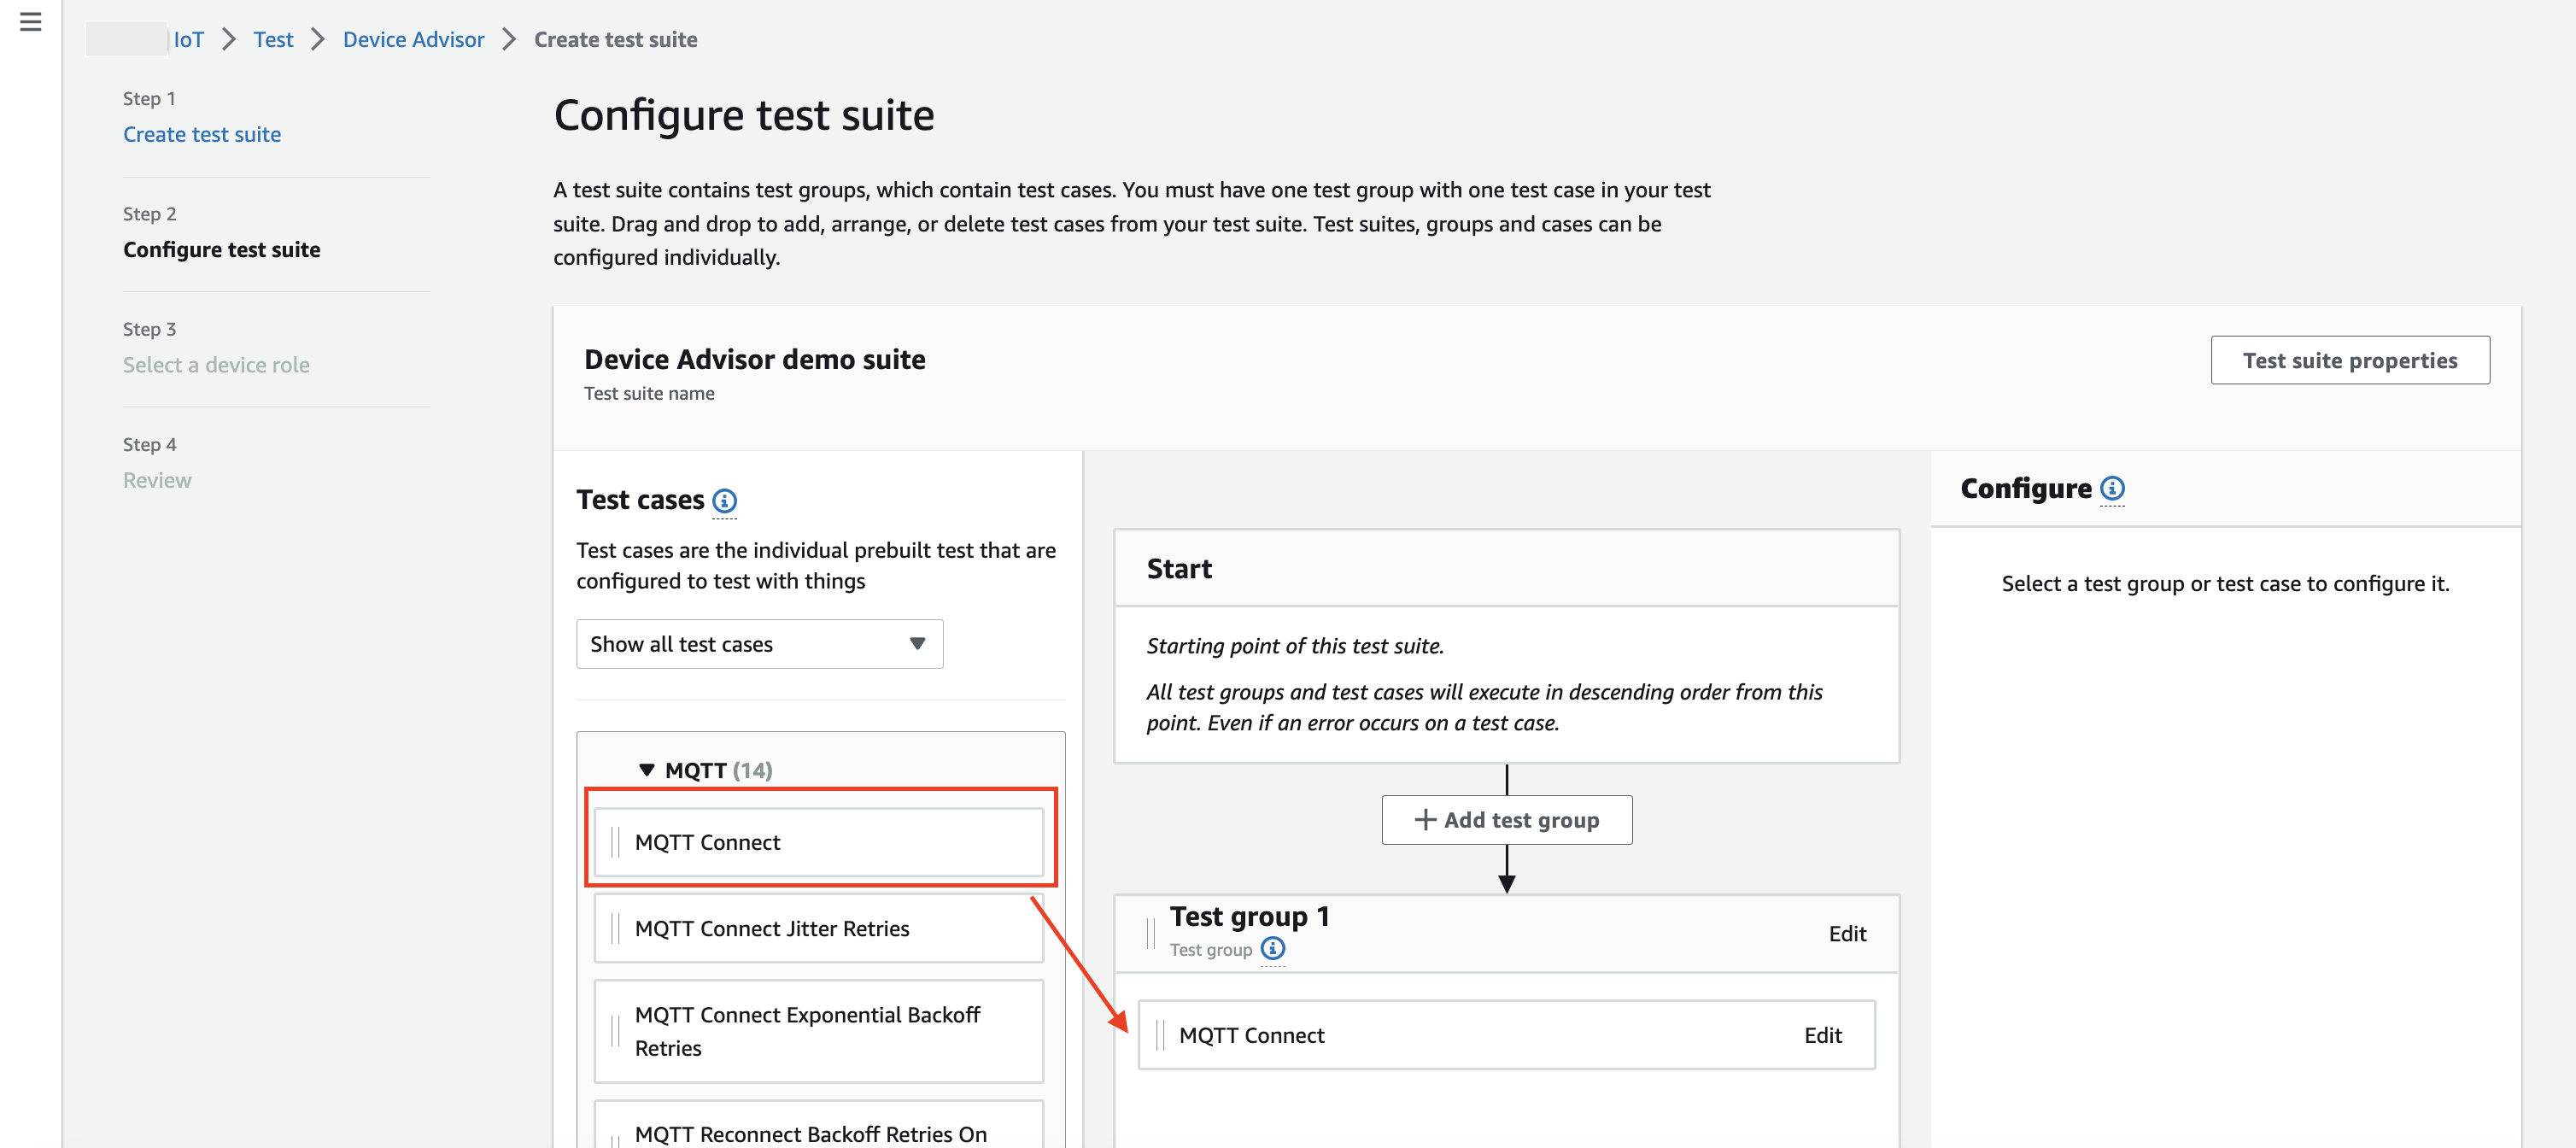 
                            The configuration interface for creating a test suite in Device Advisor, with options to add test groups and 
                                test cases for testing IoT devices.
                        